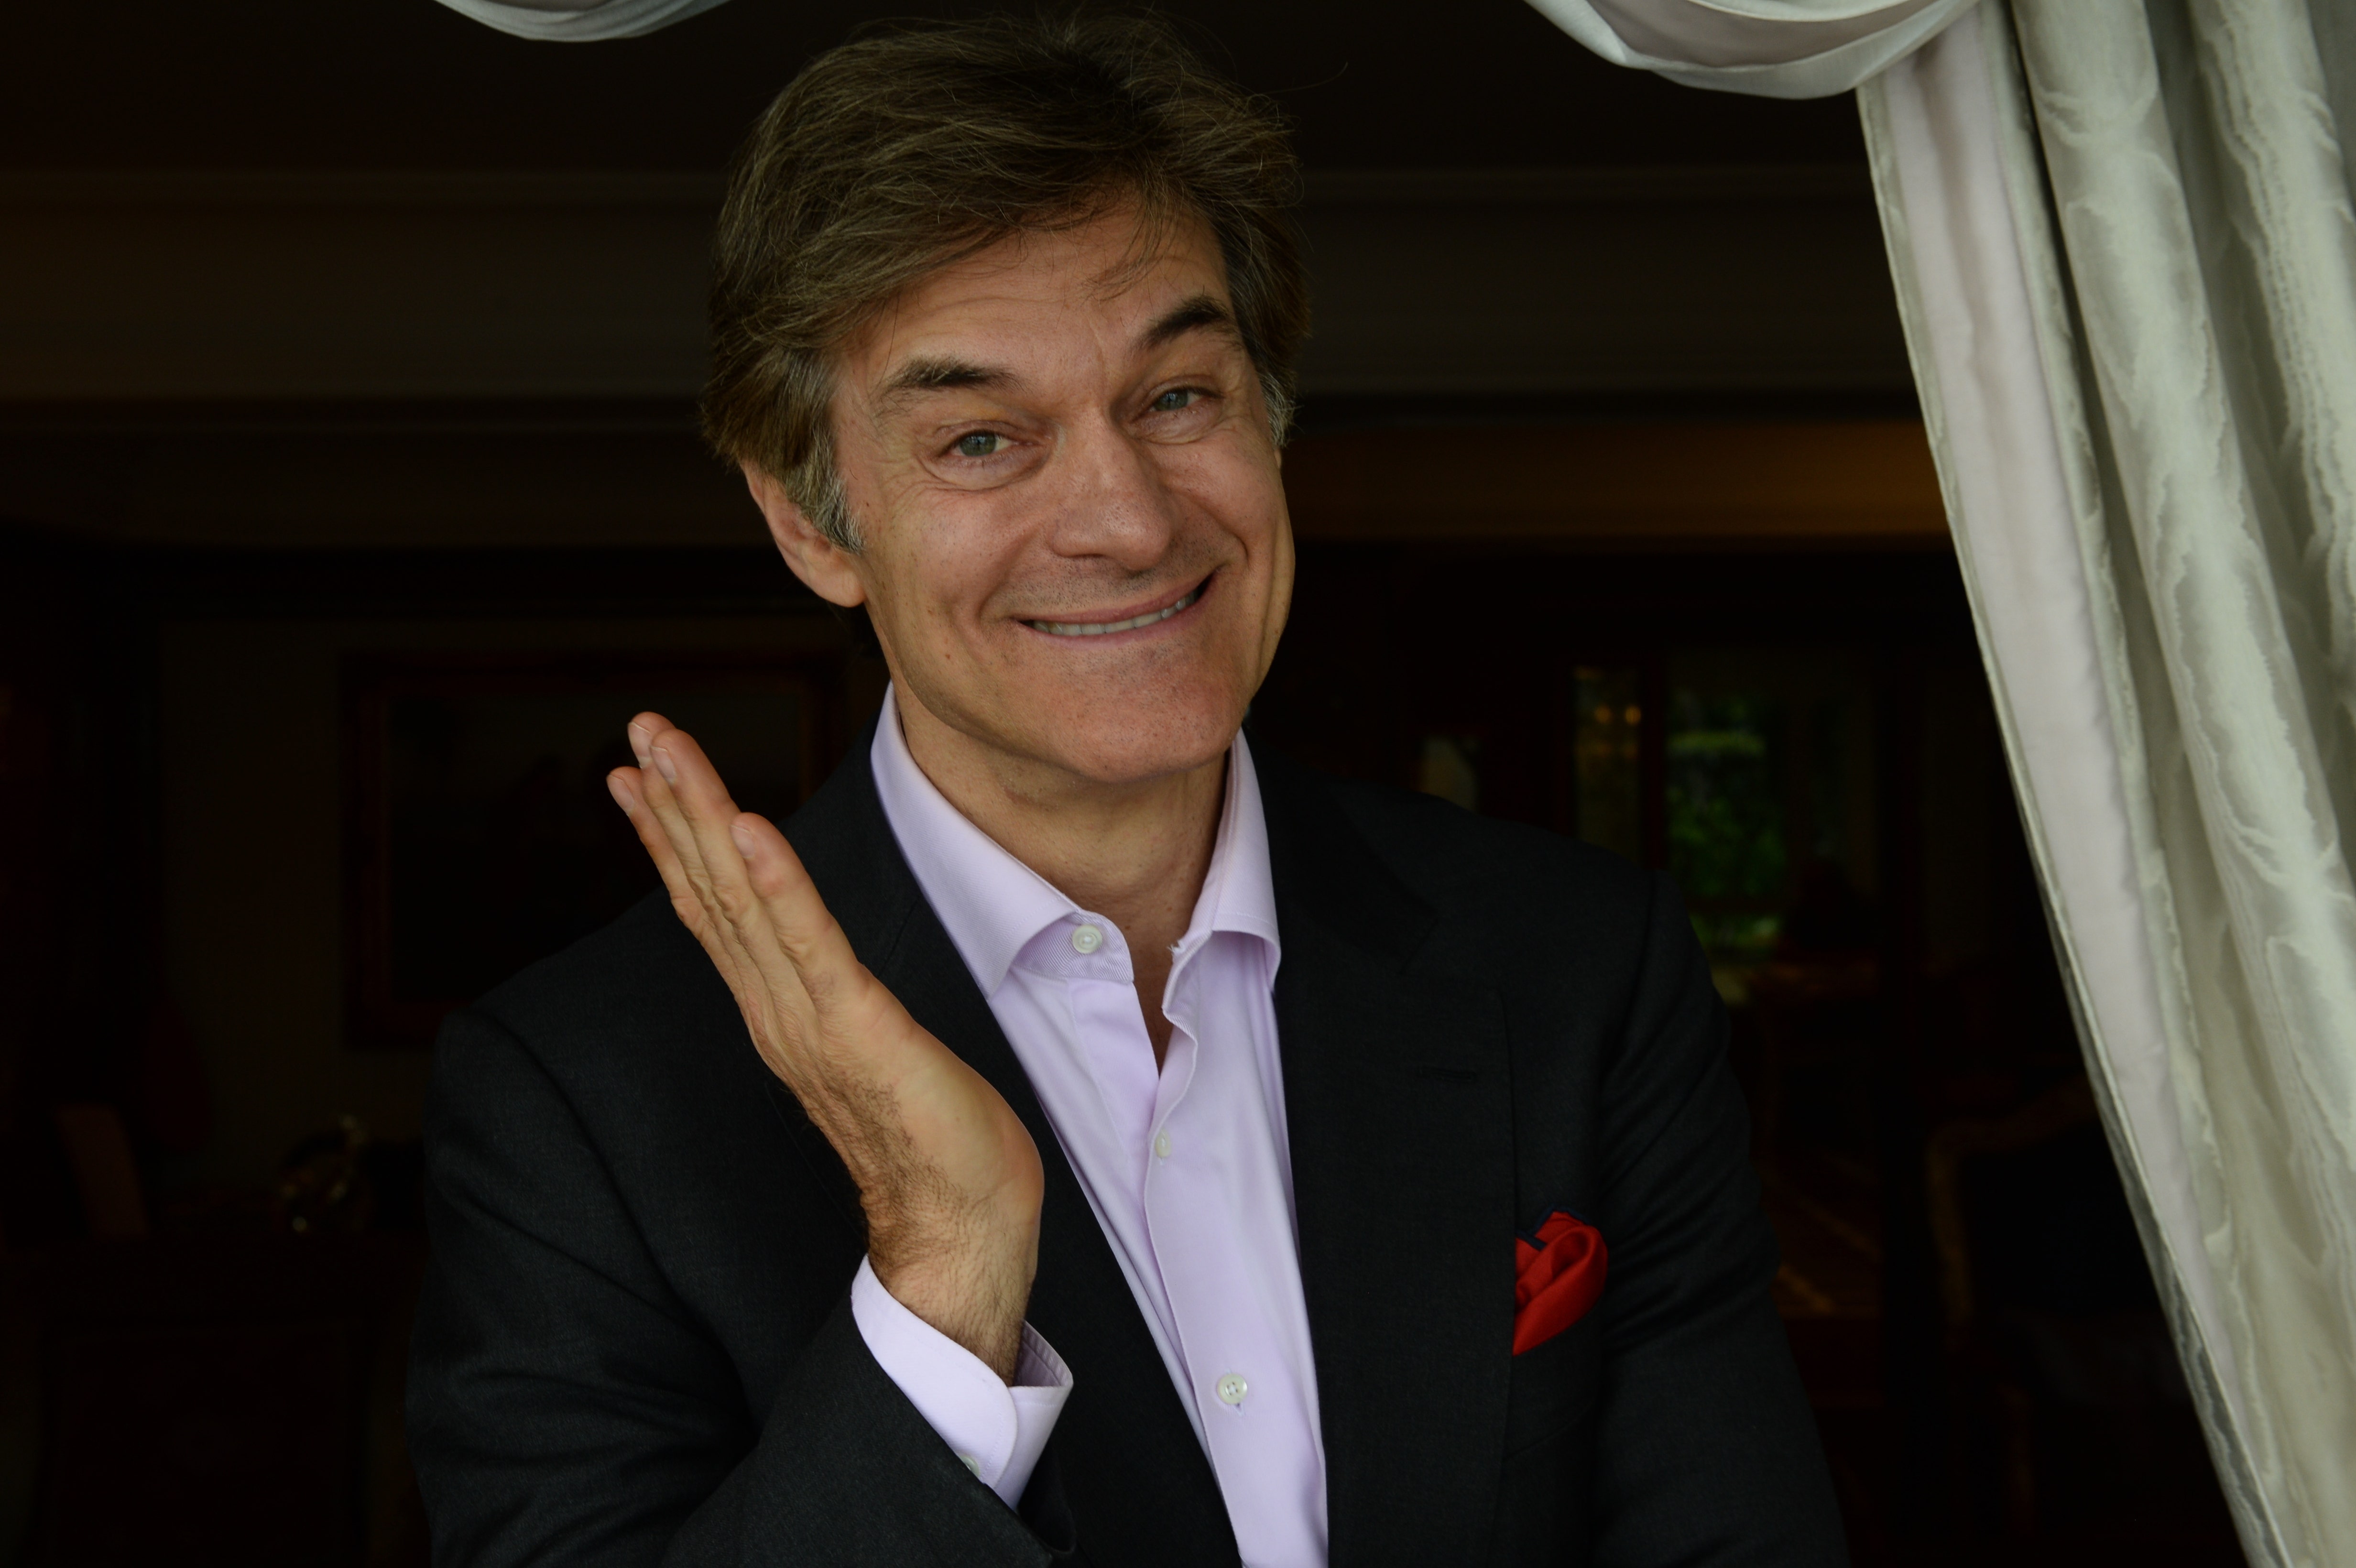 Trump Ally Dr. Oz Hyped Unapproved 'Covid Cures' From Companies He Owns Shares Of